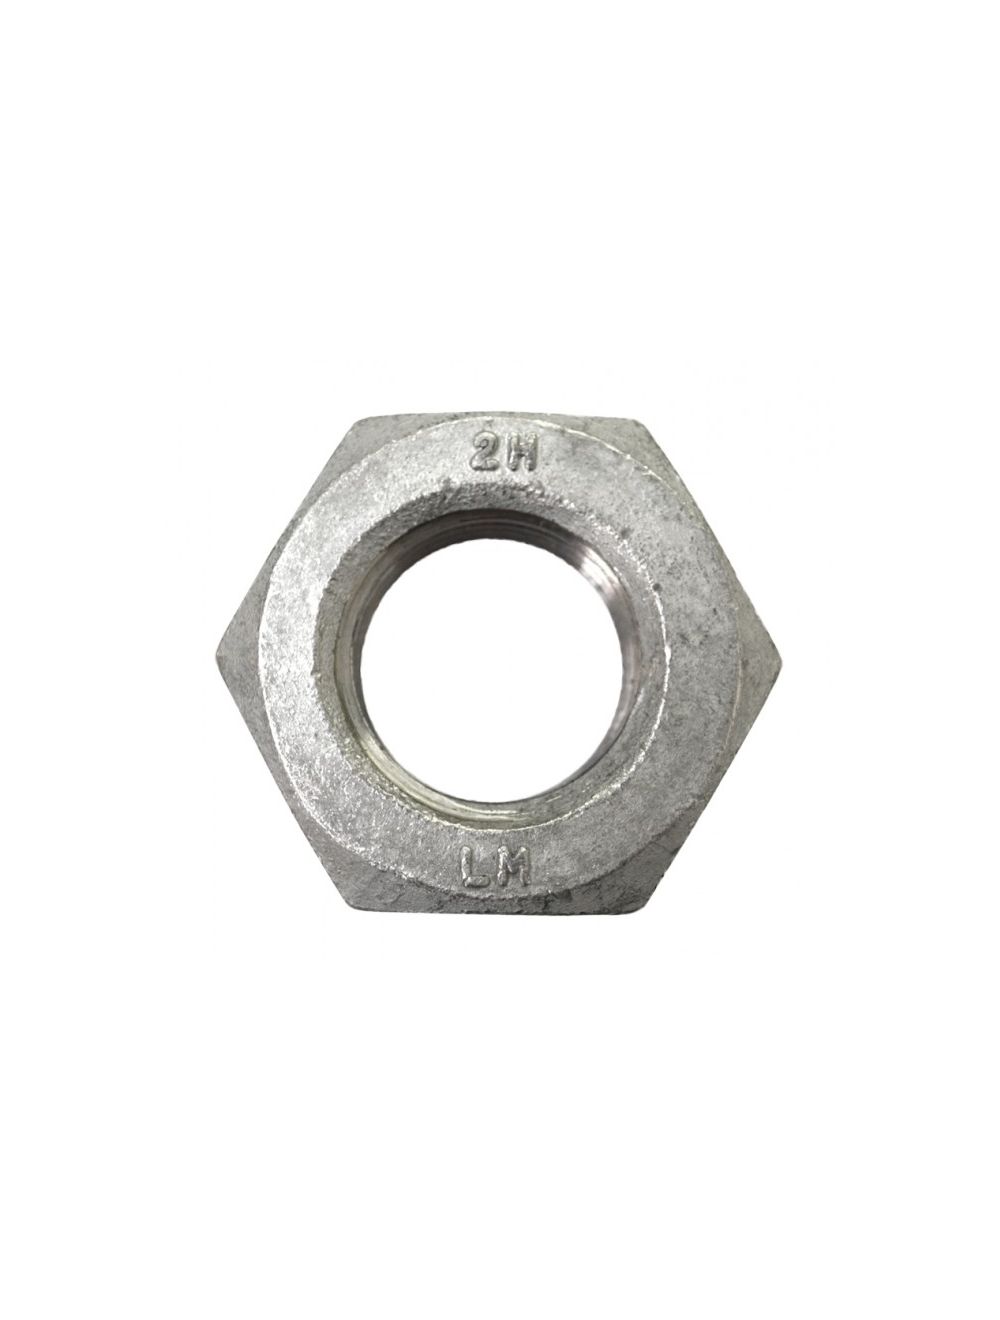 3/4-10 Heavy Hex Nut A563 Grade DH Hot Dipped Galvanized - 10 pcs 